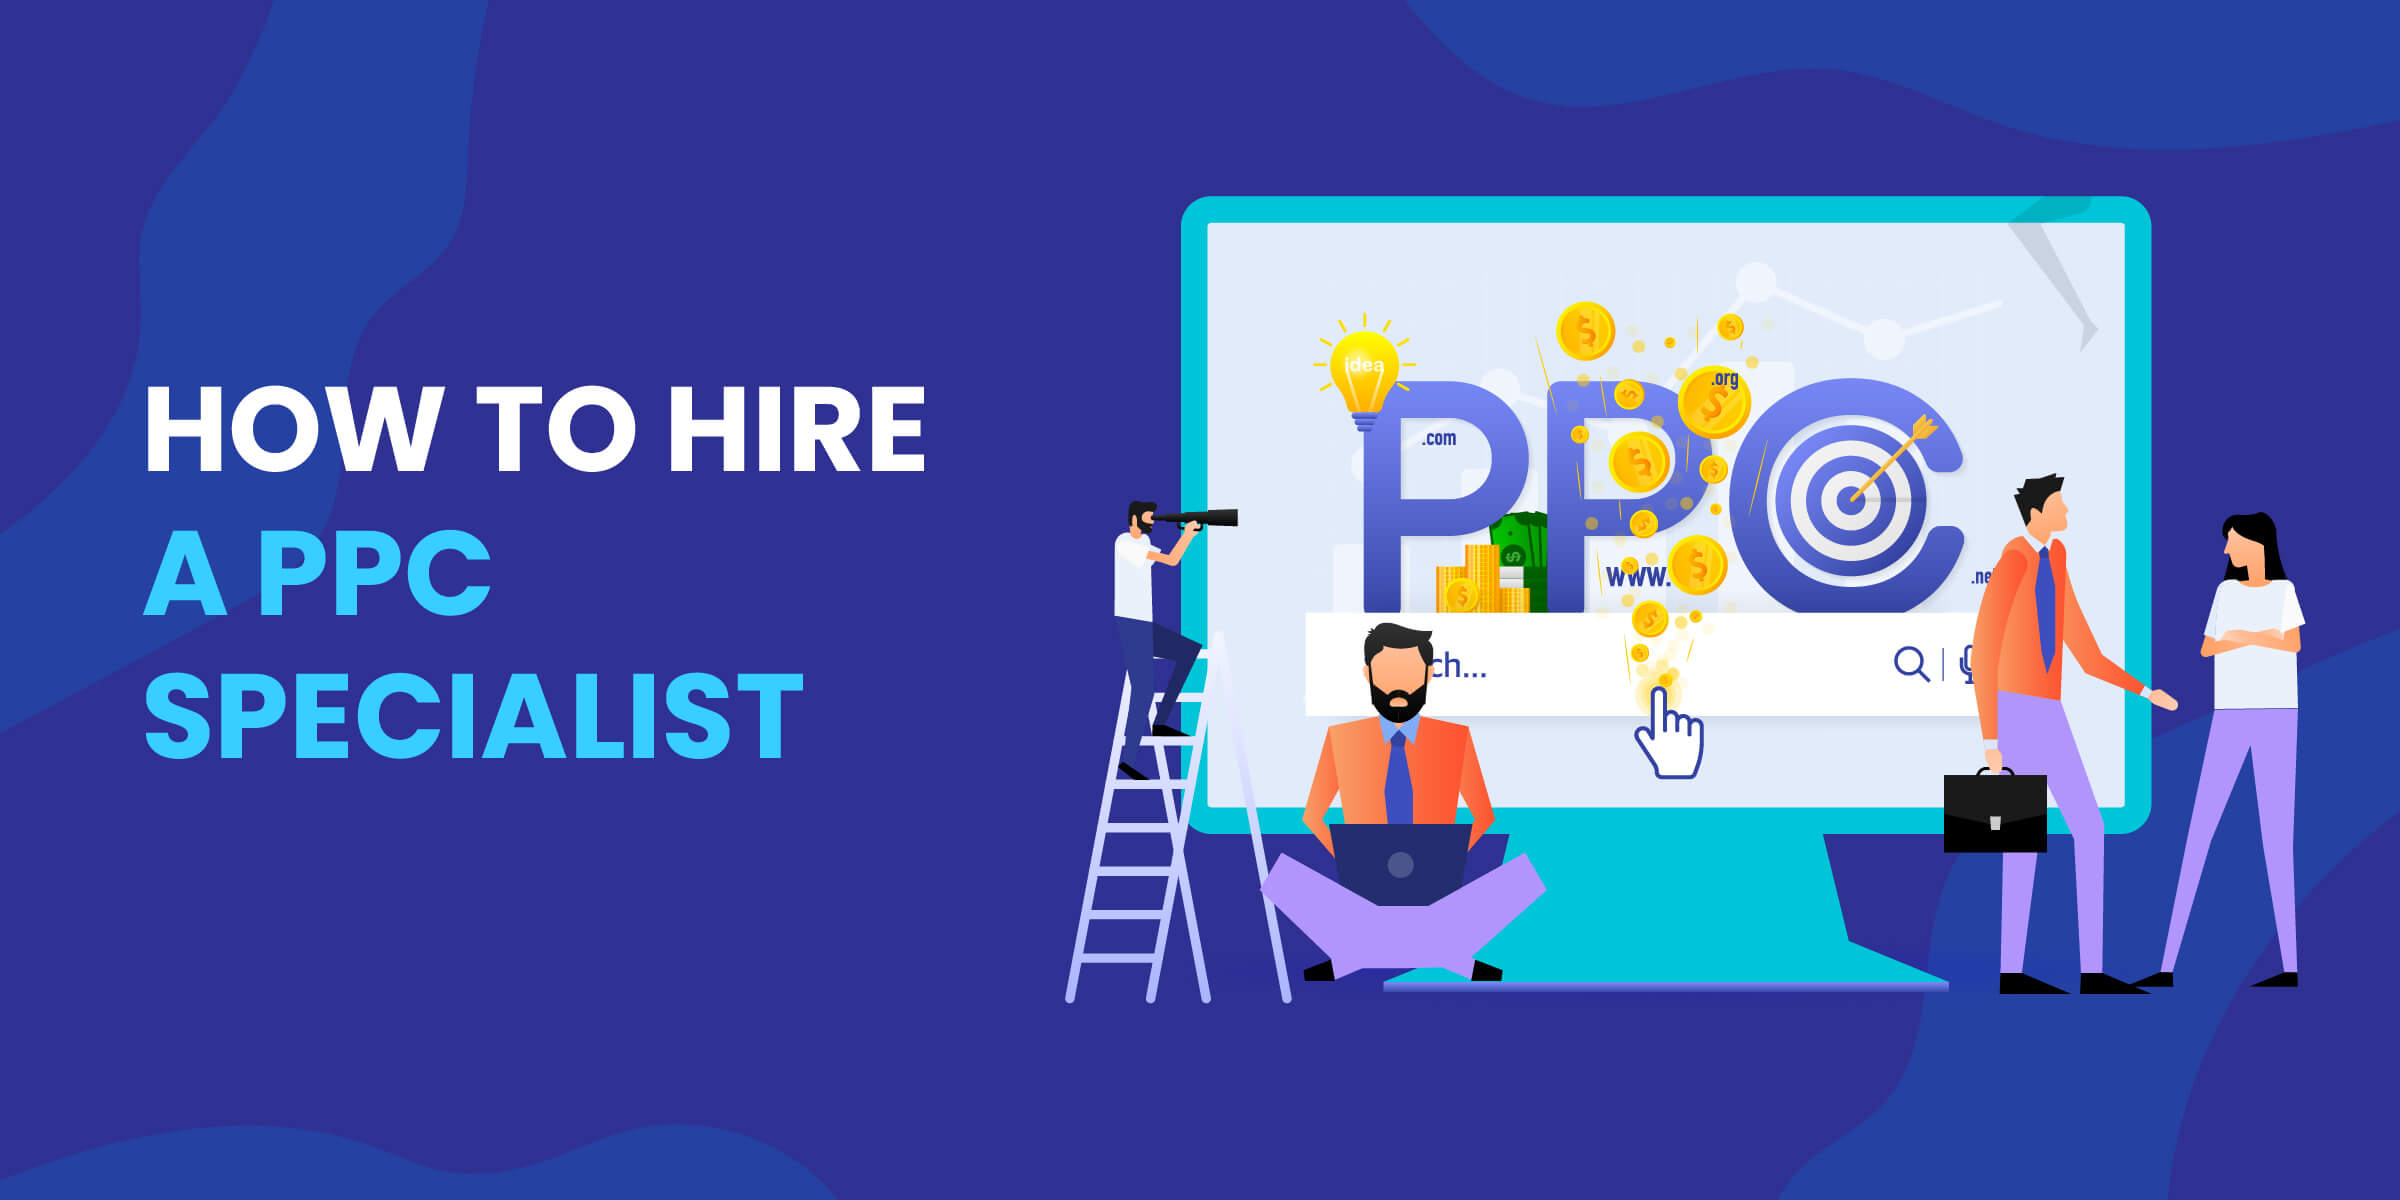 How to Hire PPC Specialist